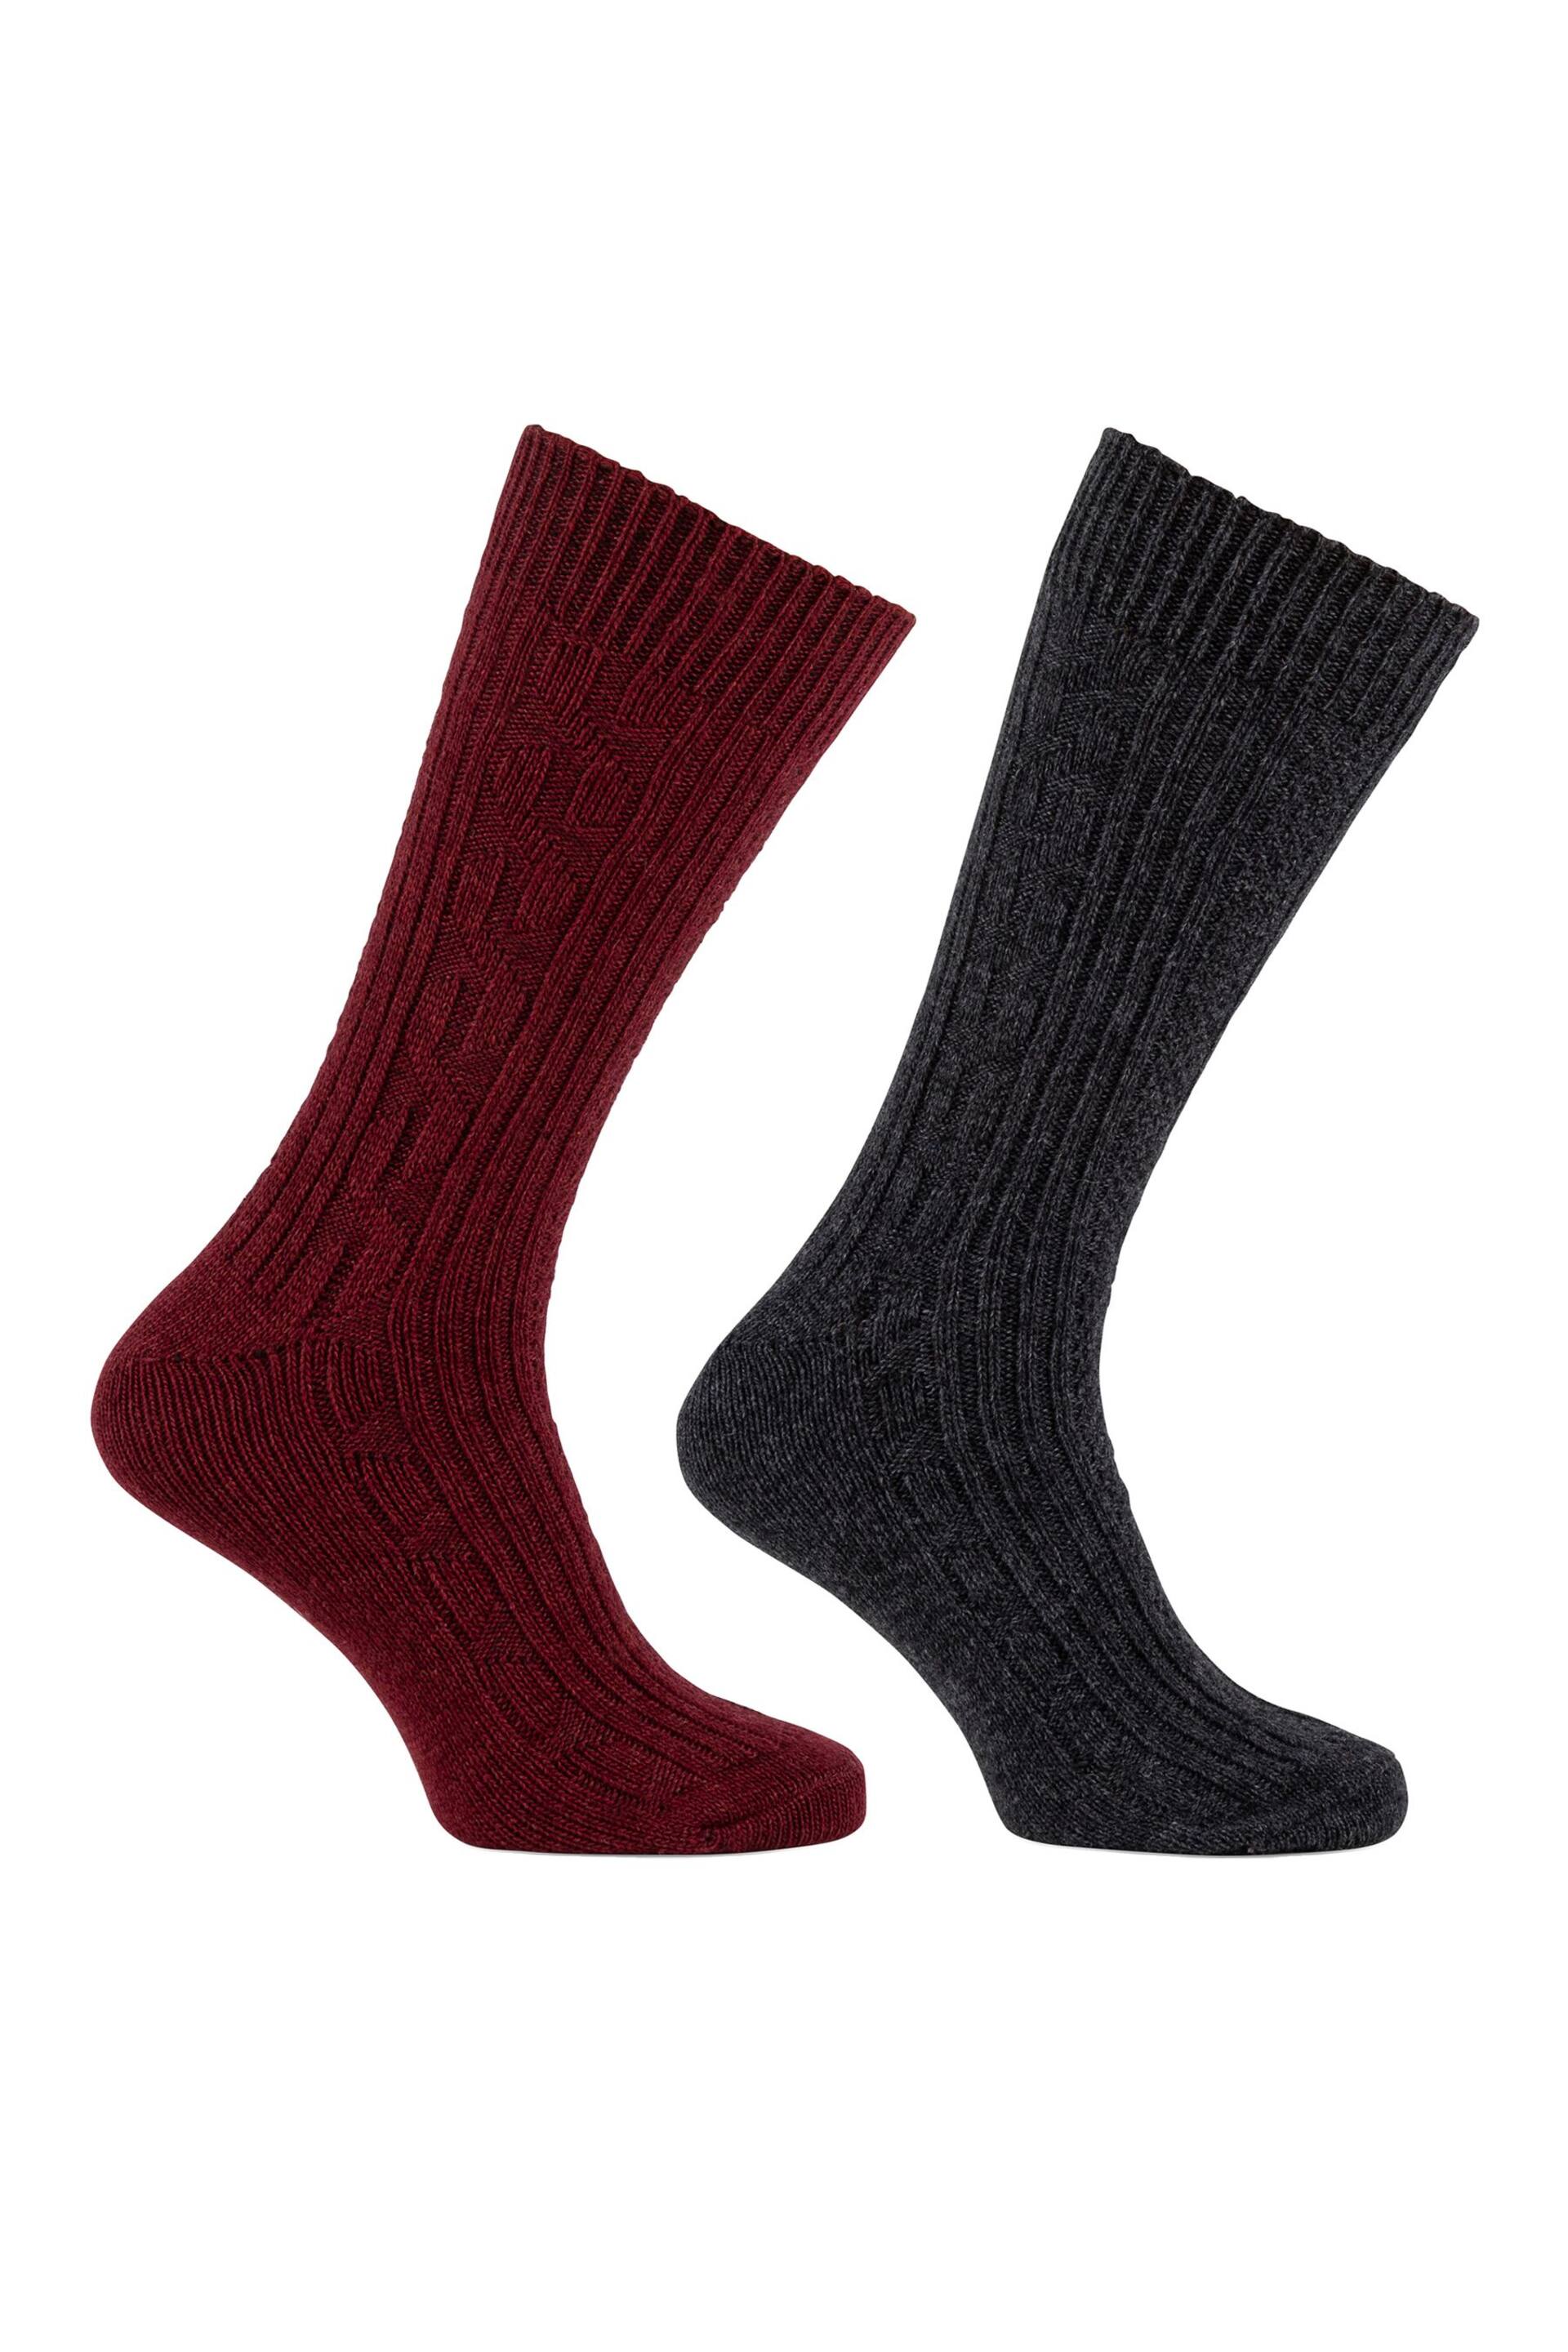 Totes Grey Twin Pack Thermal Wool Blend Socks - Image 5 of 5